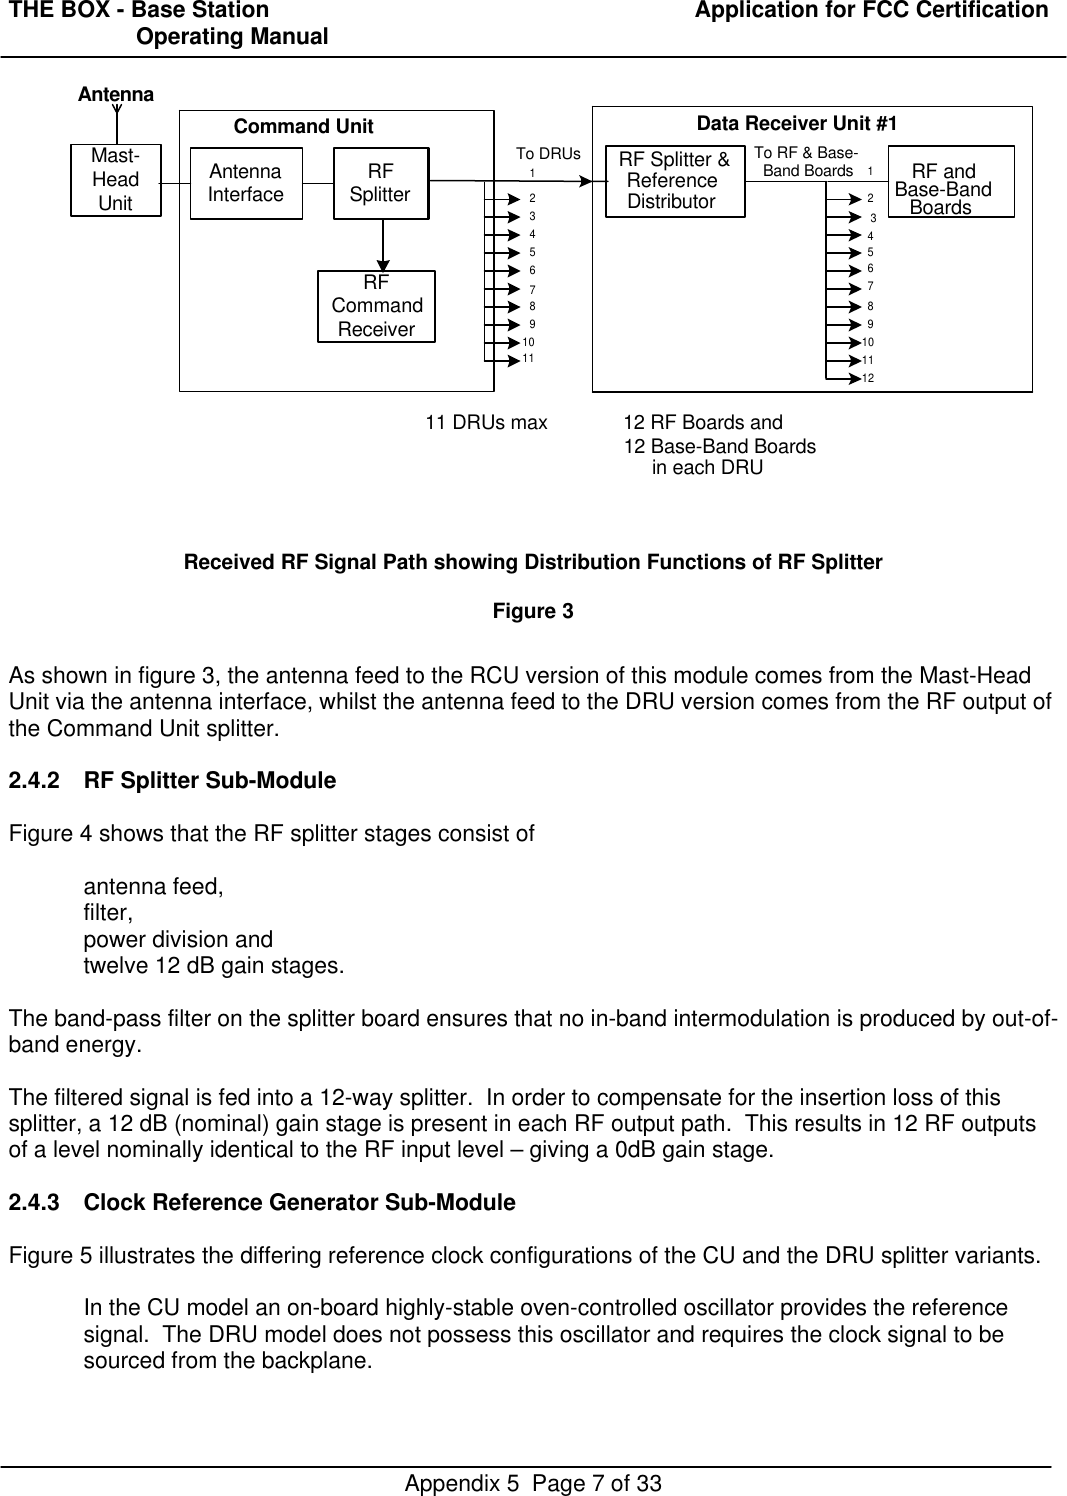 THE BOX - Base Station  Application for FCC Certification                    Operating ManualAppendix 5  Page 7 of 33Received RF Signal Path showing Distribution Functions of RF SplitterFigure 3As shown in figure 3, the antenna feed to the RCU version of this module comes from the Mast-HeadUnit via the antenna interface, whilst the antenna feed to the DRU version comes from the RF output ofthe Command Unit splitter.2.4.2 RF Splitter Sub-ModuleFigure 4 shows that the RF splitter stages consist ofantenna feed,filter,power division andtwelve 12 dB gain stages.The band-pass filter on the splitter board ensures that no in-band intermodulation is produced by out-of-band energy.The filtered signal is fed into a 12-way splitter.  In order to compensate for the insertion loss of thissplitter, a 12 dB (nominal) gain stage is present in each RF output path.  This results in 12 RF outputsof a level nominally identical to the RF input level – giving a 0dB gain stage.2.4.3 Clock Reference Generator Sub-ModuleFigure 5 illustrates the differing reference clock configurations of the CU and the DRU splitter variants.In the CU model an on-board highly-stable oven-controlled oscillator provides the referencesignal.  The DRU model does not possess this oscillator and requires the clock signal to besourced from the backplane.Mast-HeadUnitAntennaInterface RFSplitterRF Splitter &amp;ReferenceDistributor123456789101112RF andBase-BandBoardsAntennaRFCommandReceiver11 DRUs max 12 RF Boards and12 Base-Band Boardsin each DRUCommand Unit Data Receiver Unit #1To RF &amp; Base-Band Boards234567891011To DRUs1